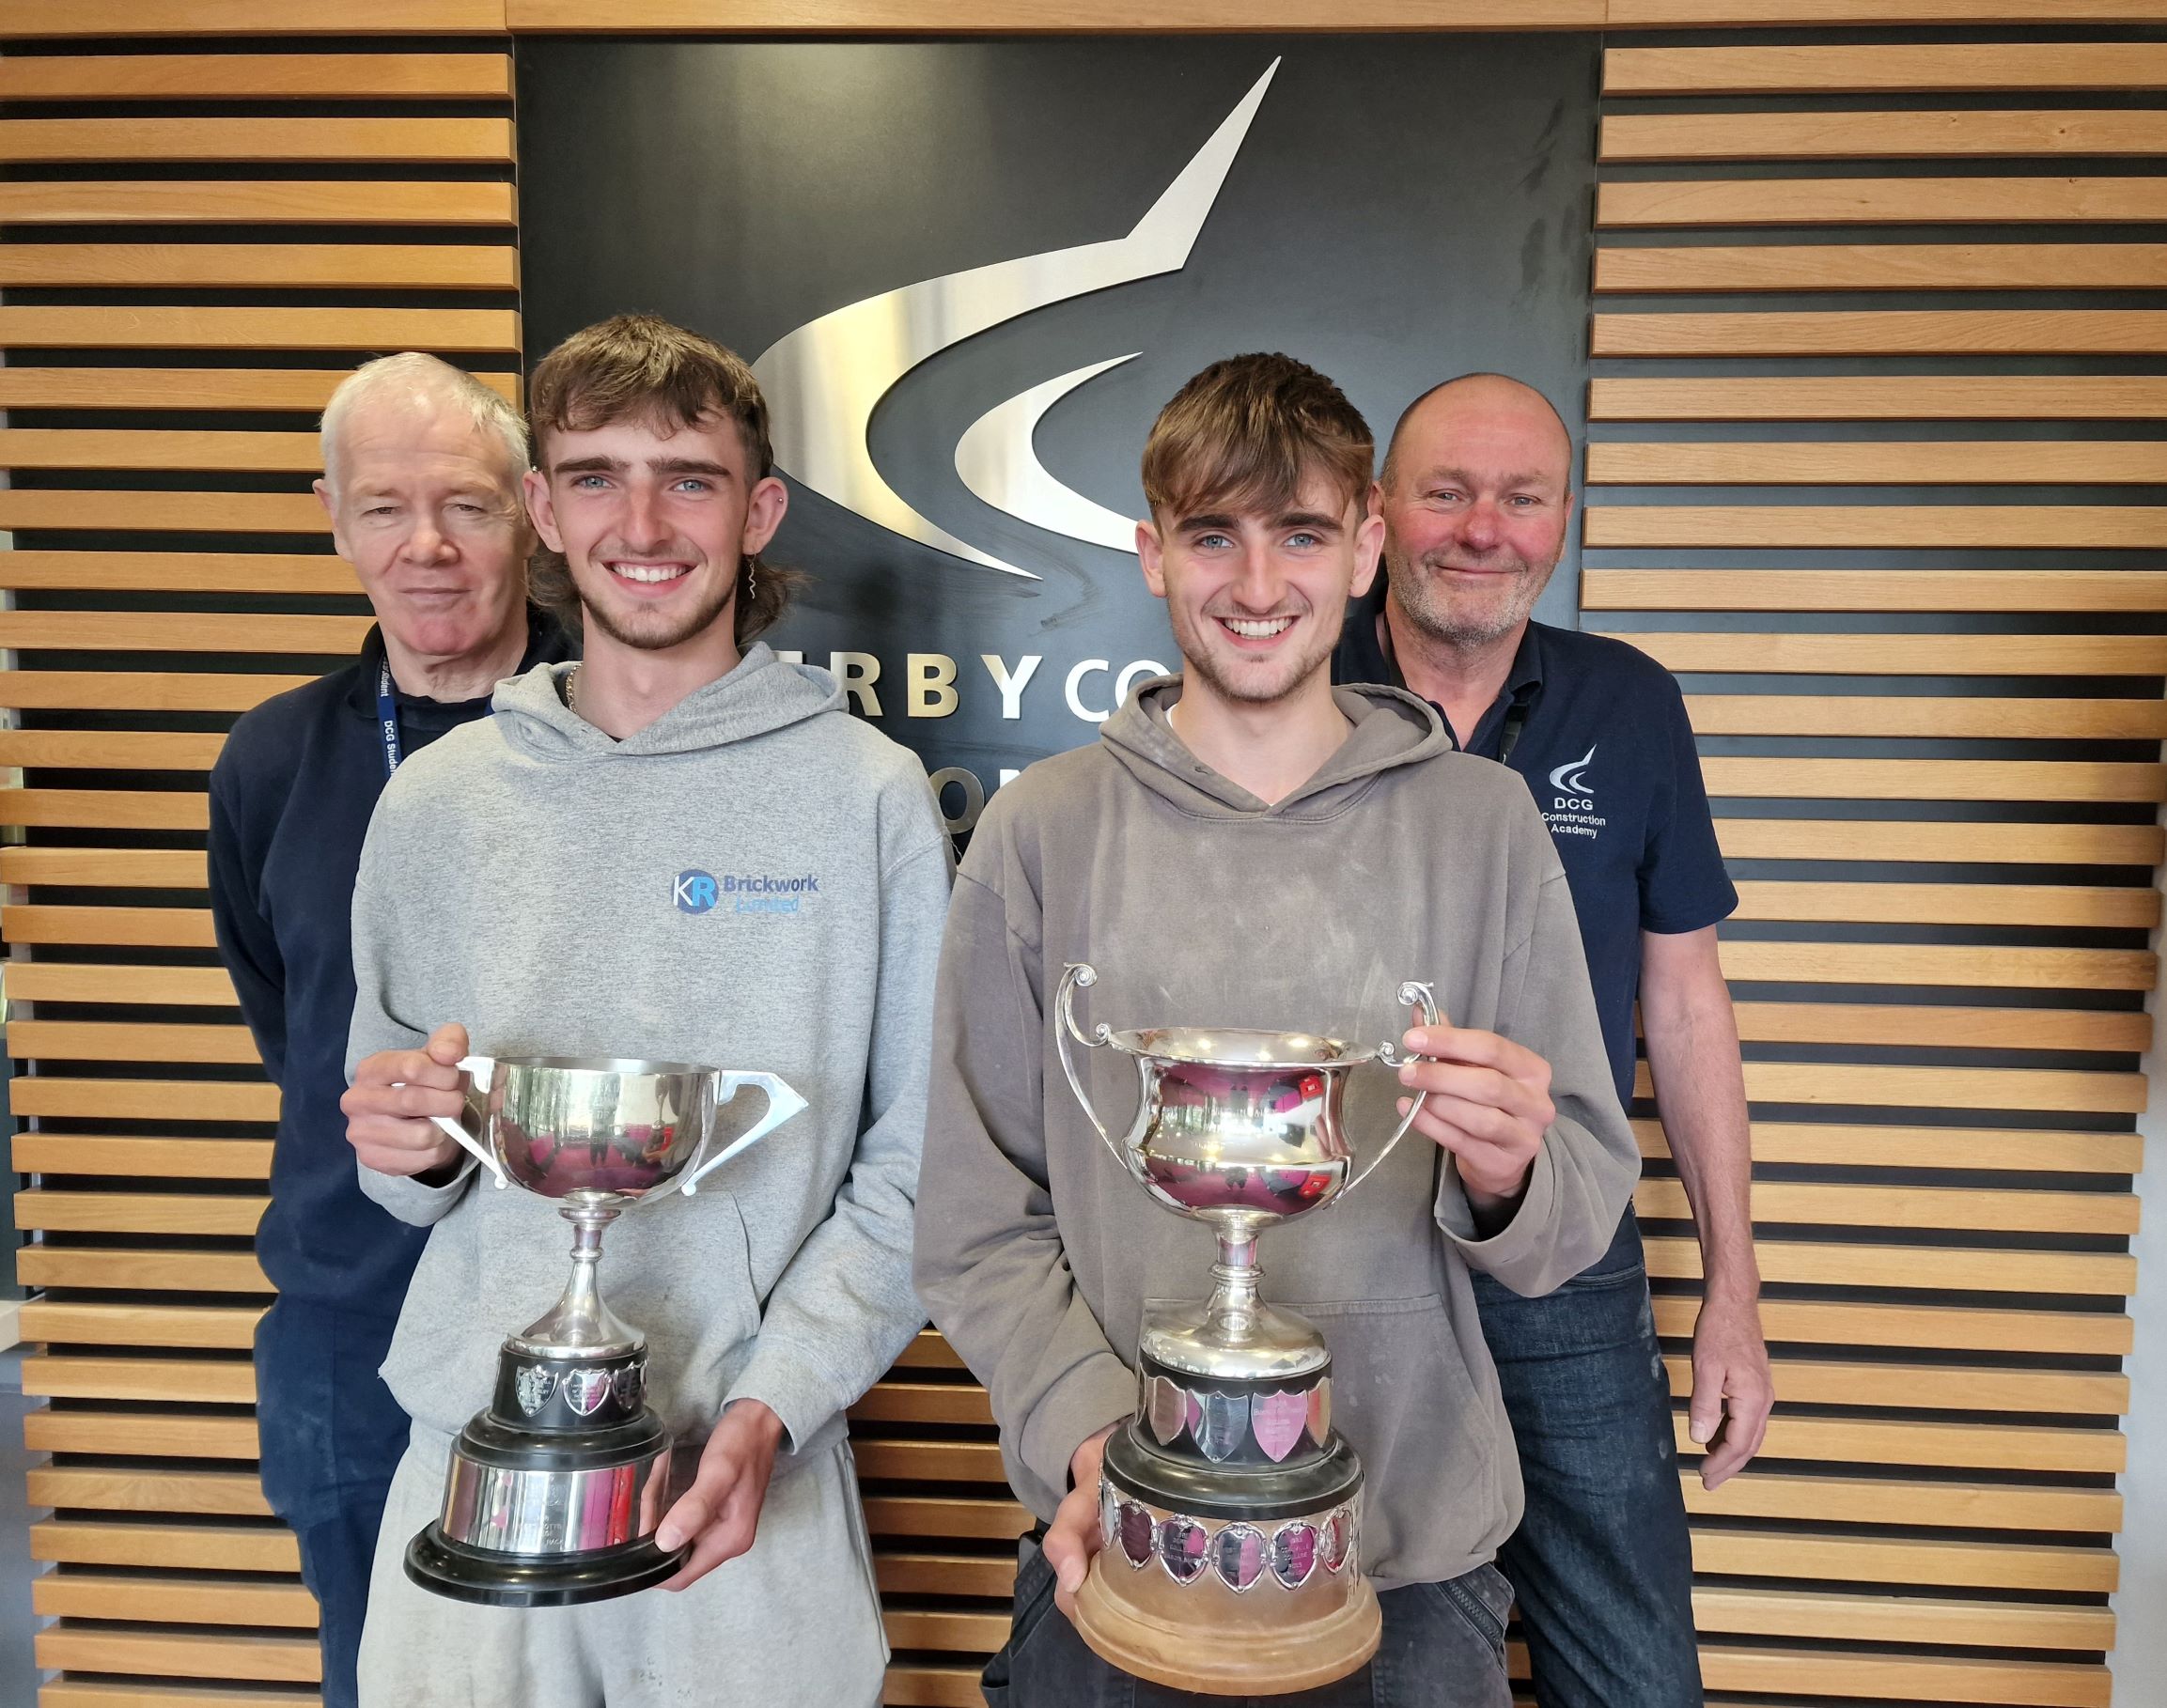 Bricklaying students Jonny and George McFarlane holding their awards stood with teachers Bill Bentley and Clive Smith.